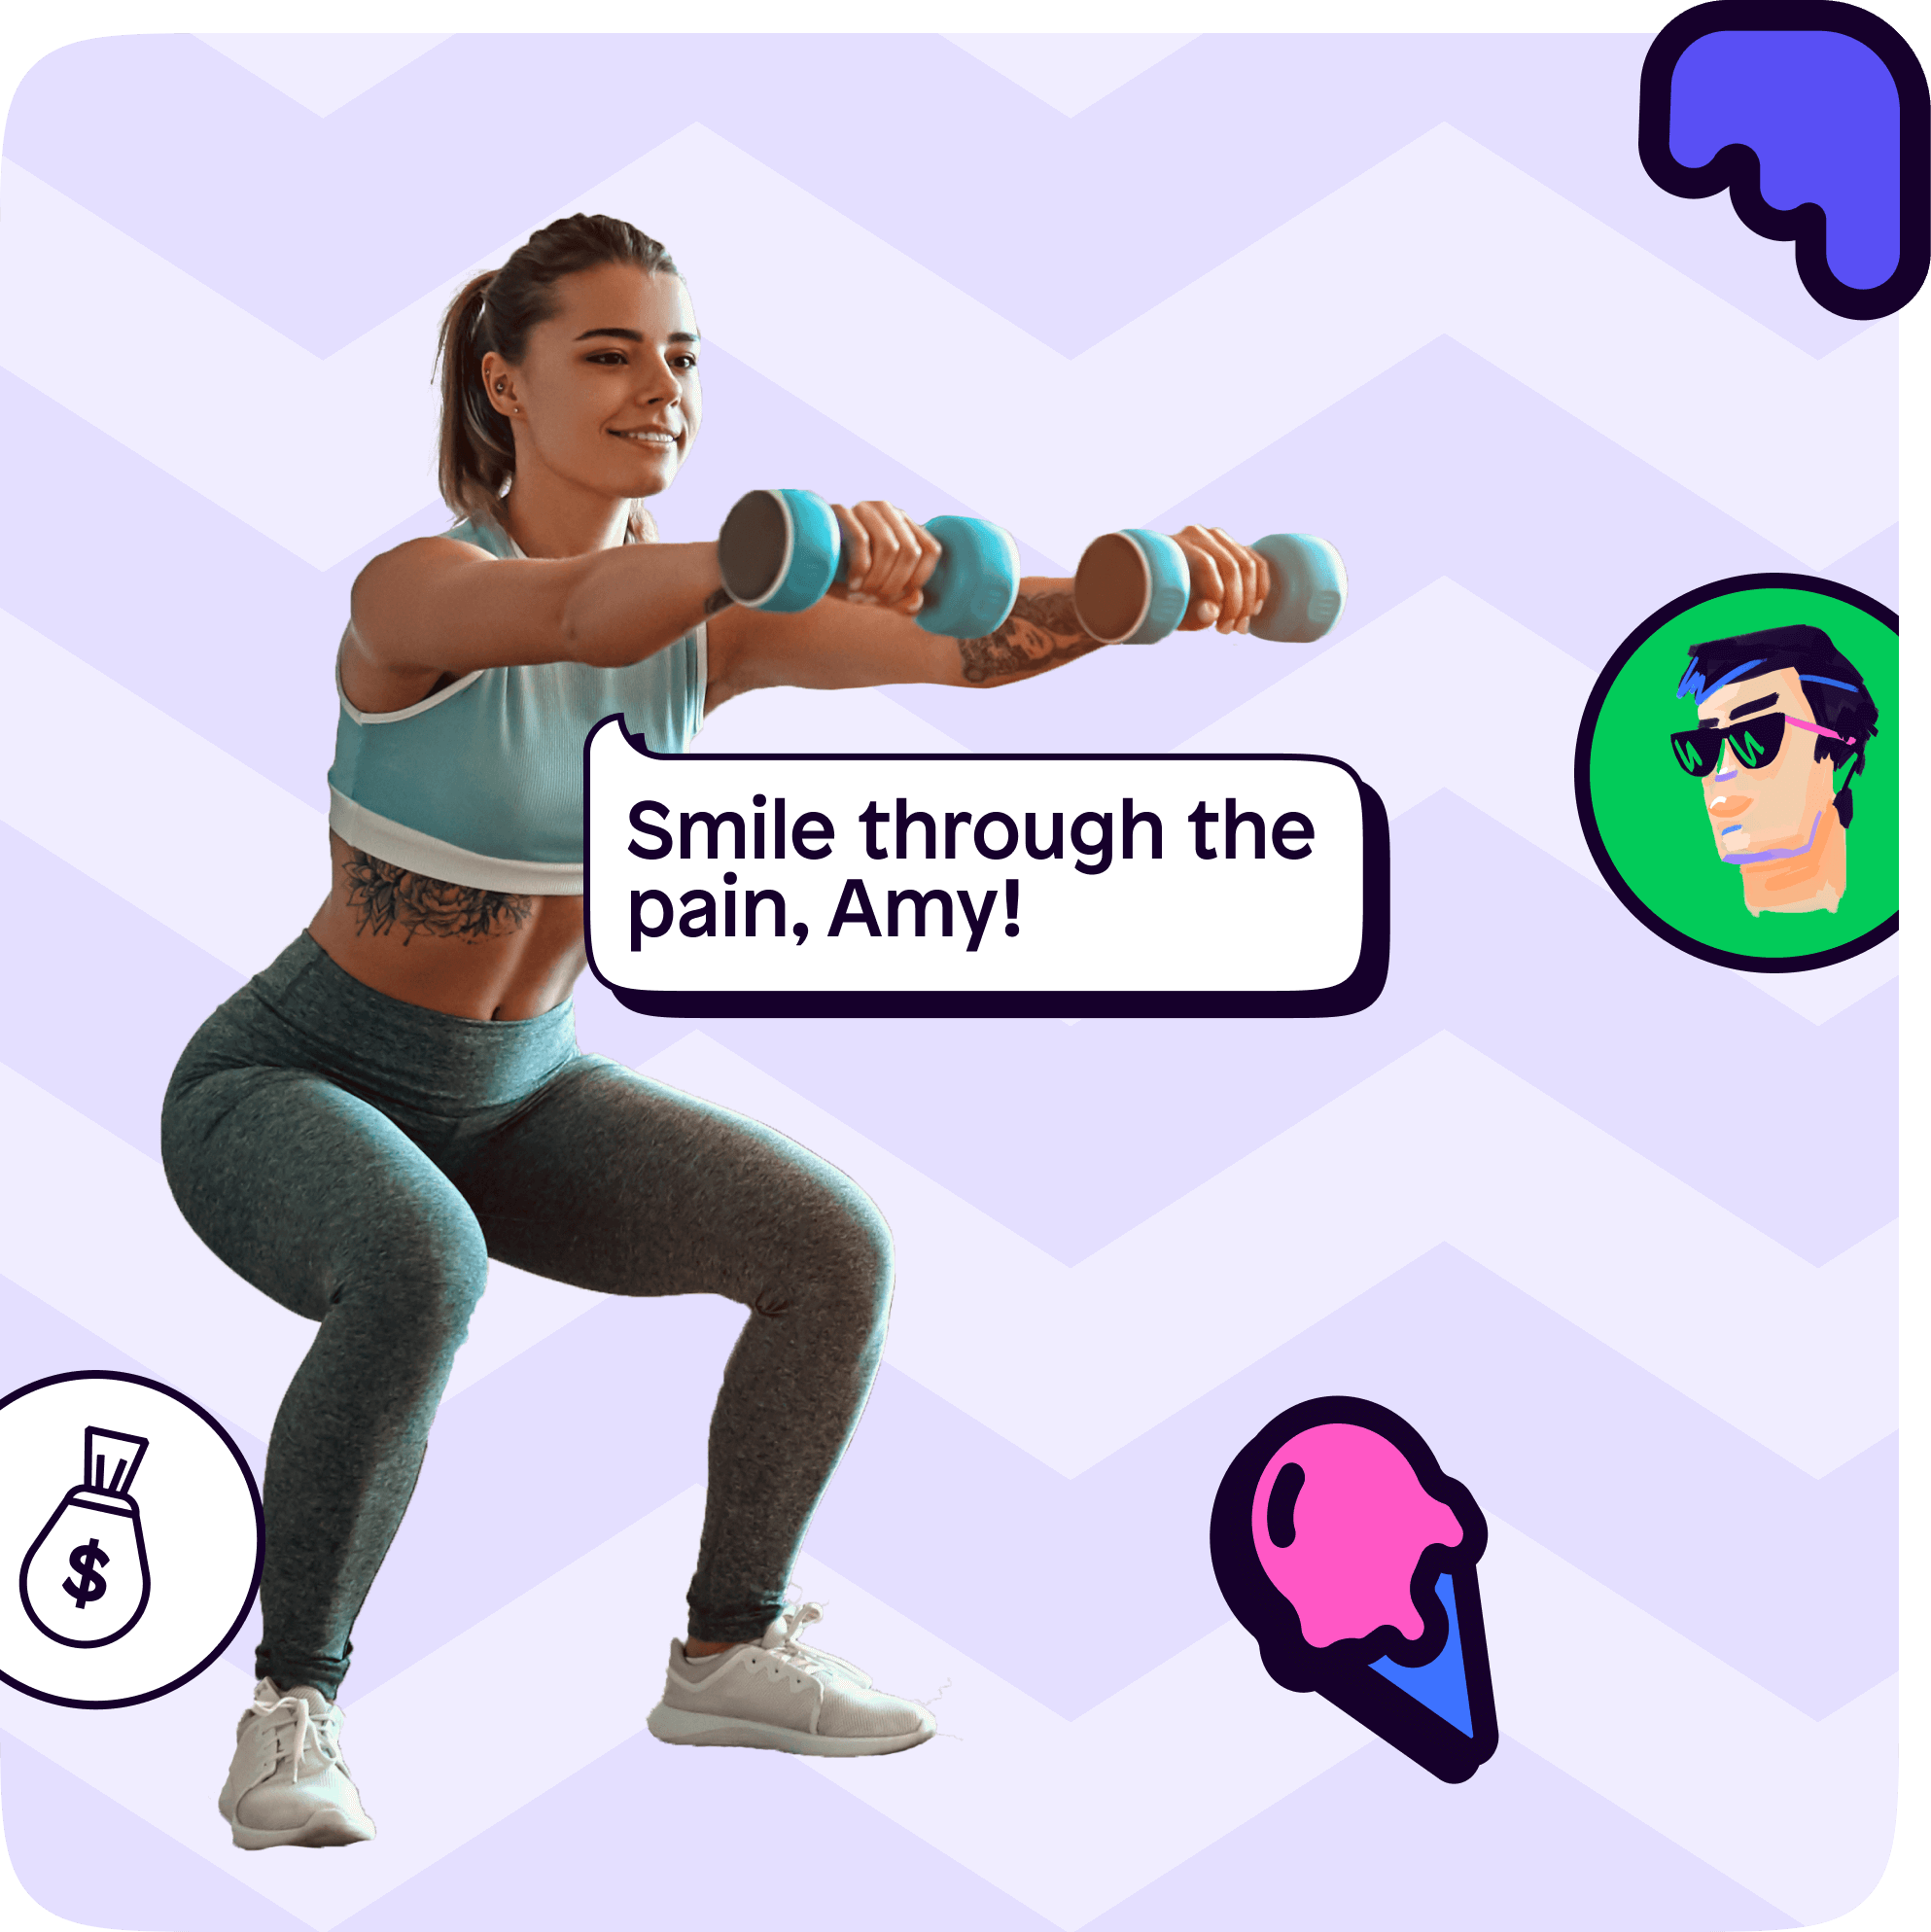 Amy working out